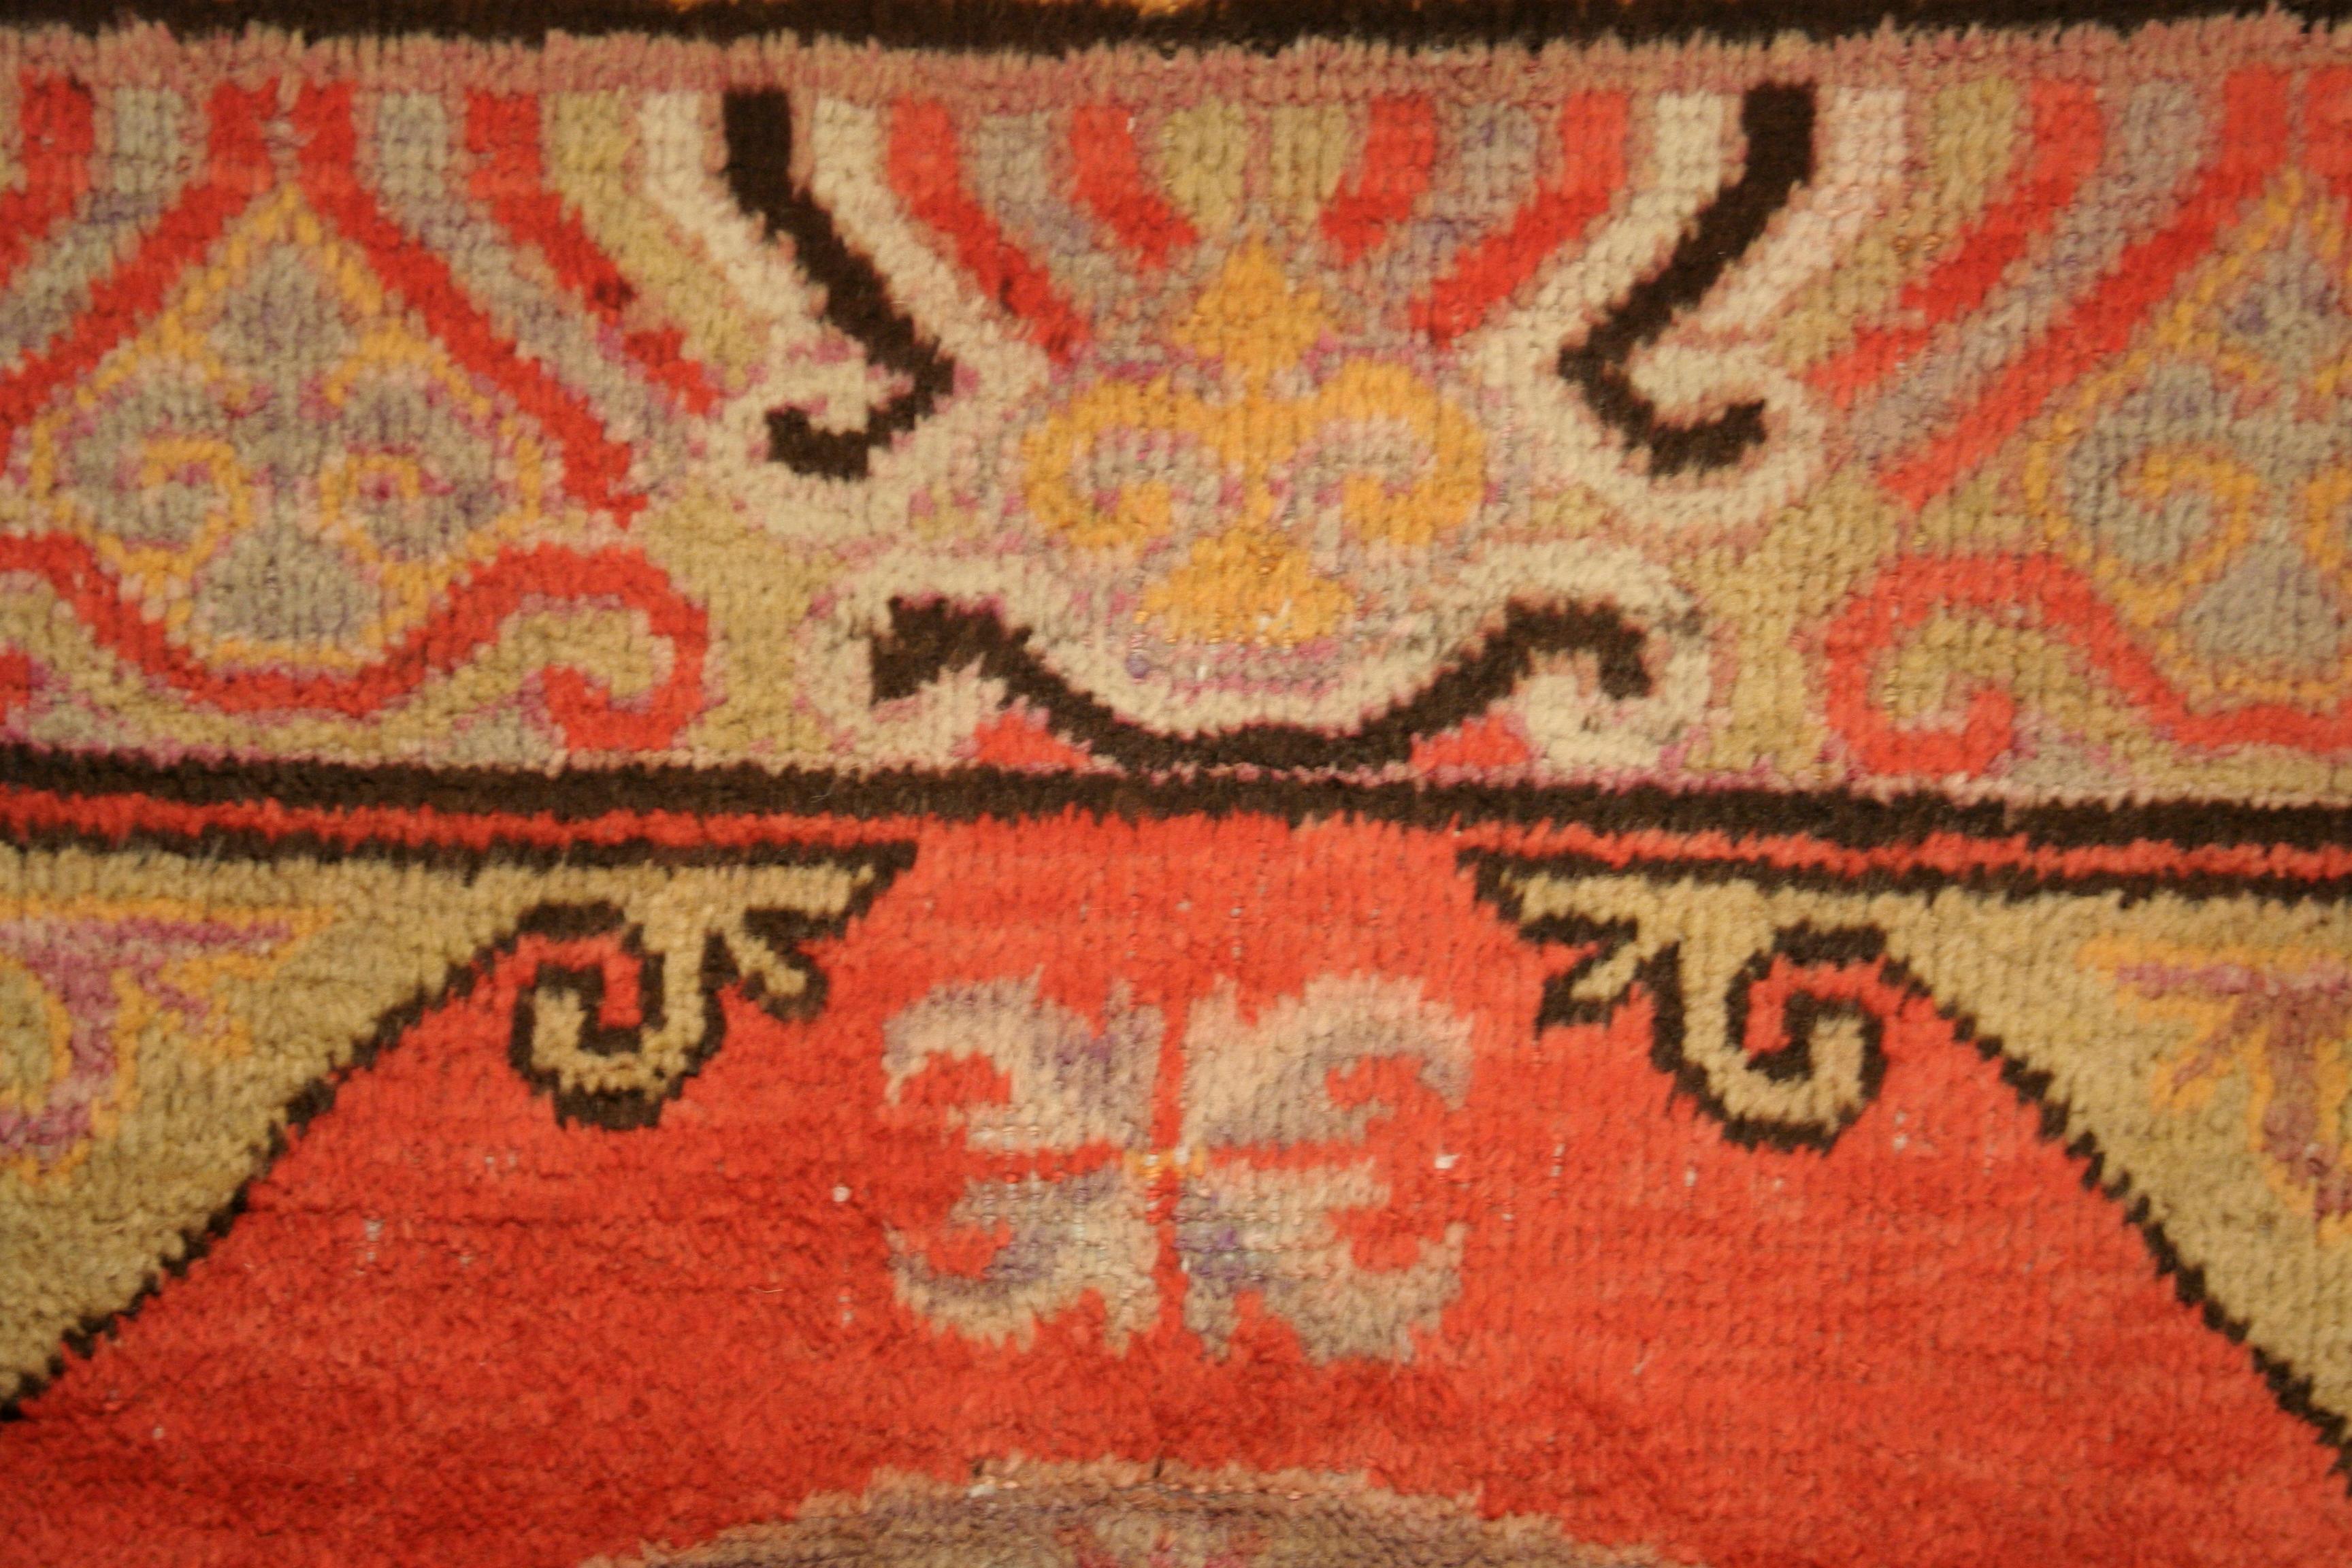 The rugs of east Turkestan, called Khotan, Yarkand, Kashgar or more commonly Samarkand - have always represented the rarest and most coveted weavings both among interior designers and collectors. Being in perfect balance between curvilinear and